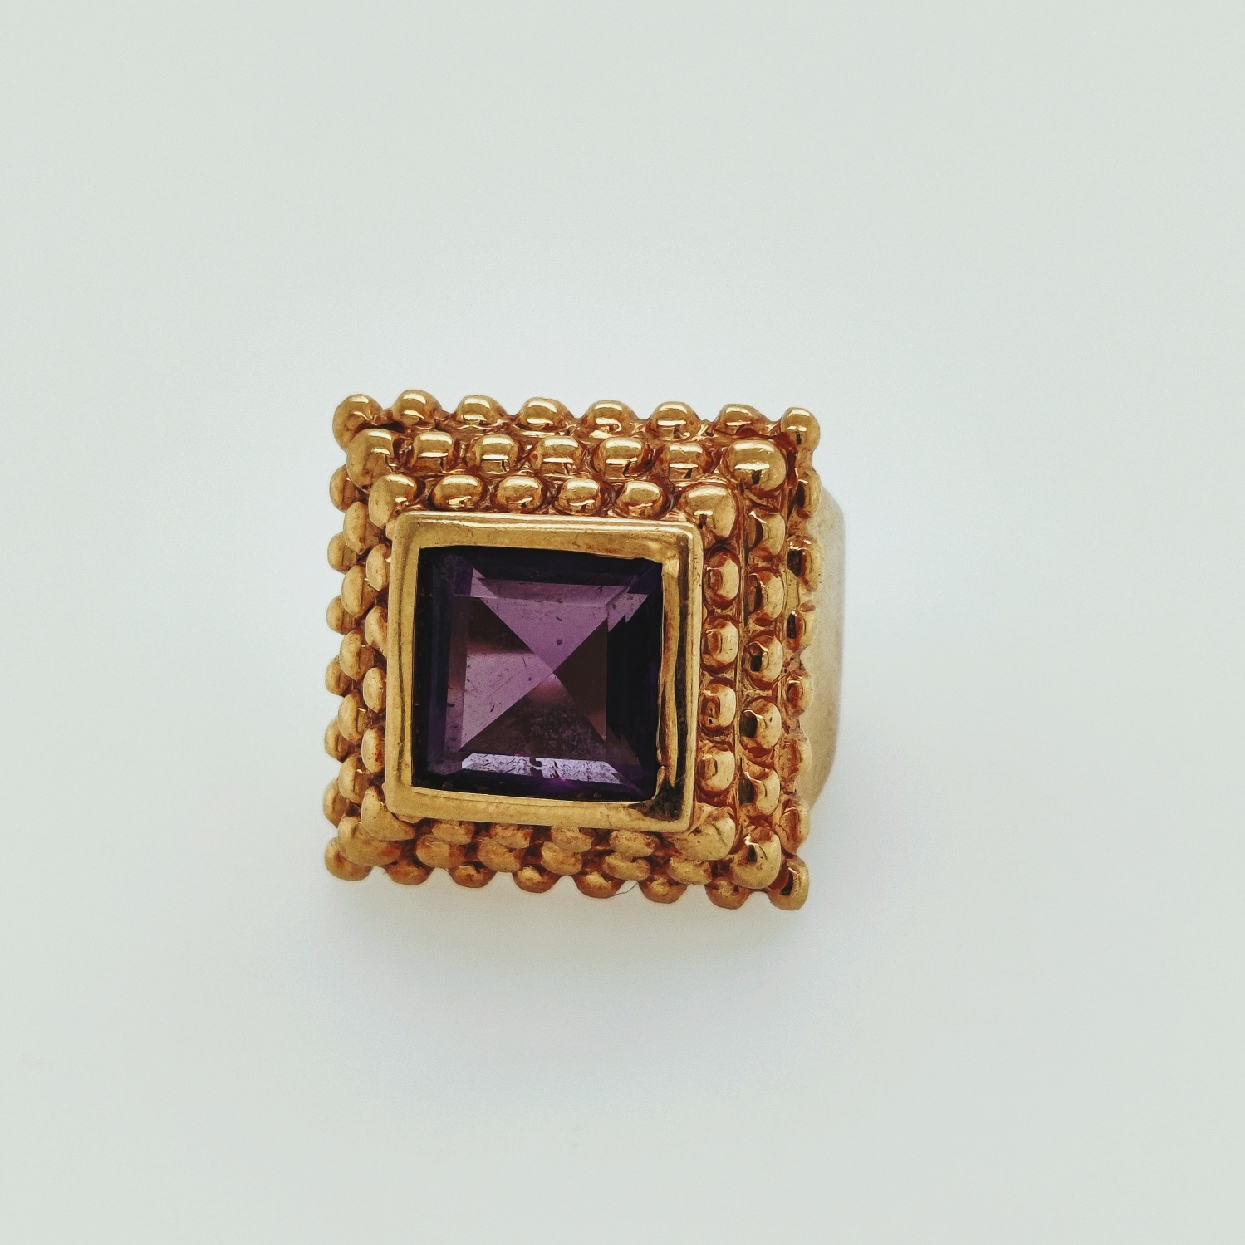 18K Yellow Gold Ring with Square Cut Amethyst and Beaded Accents with a Tapered Shank Size 7.5